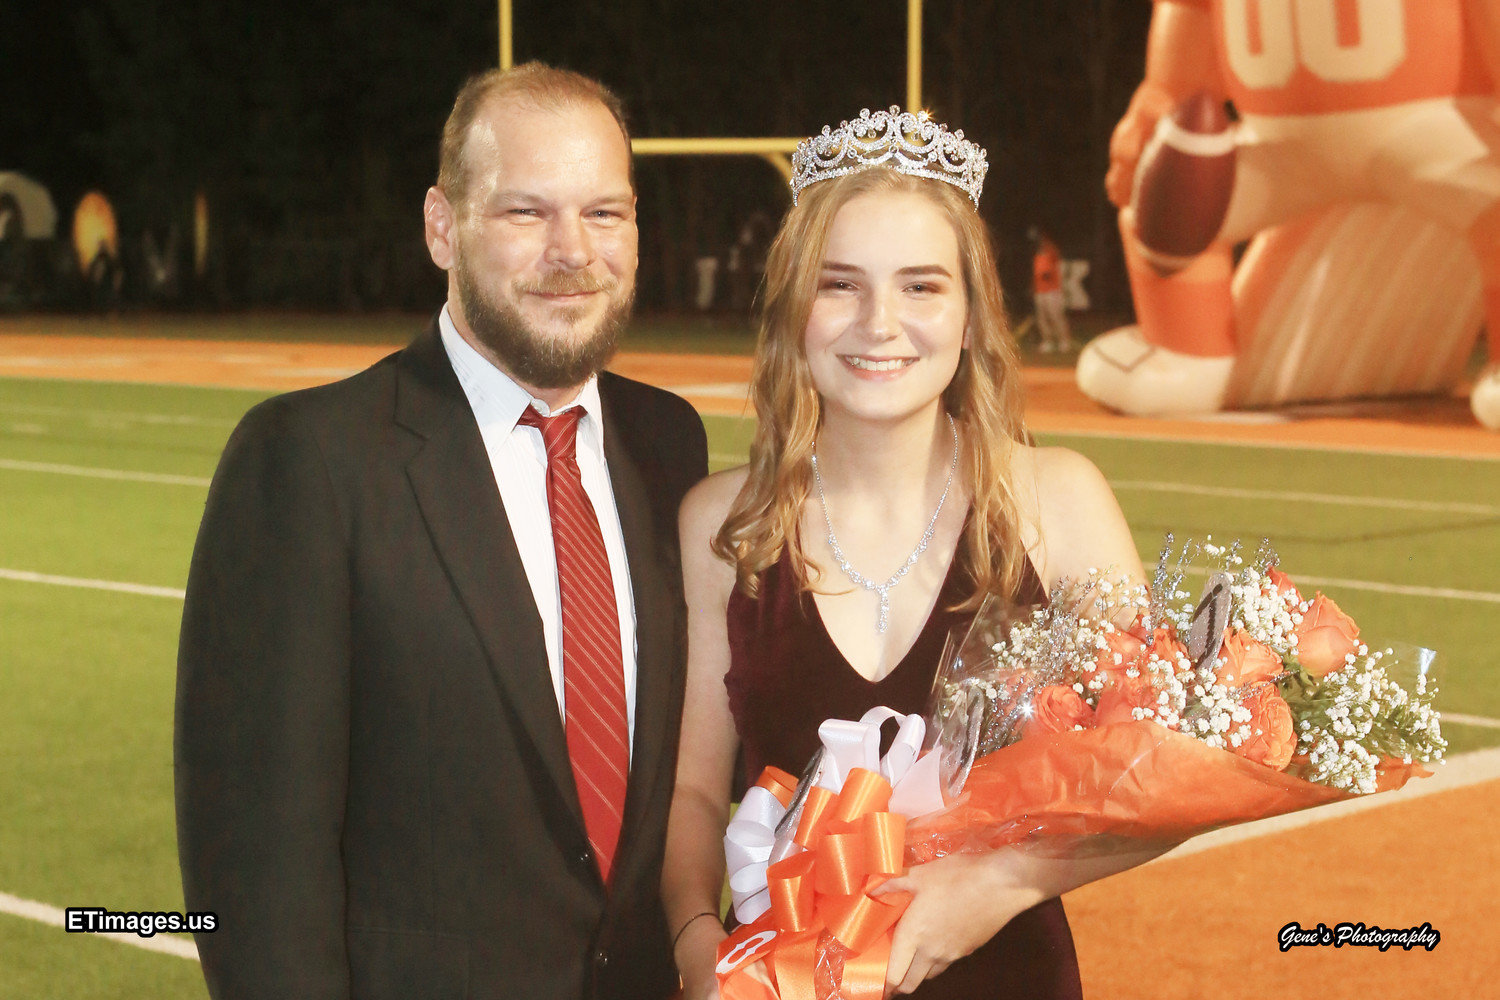 Lena Hughes was named the 2018 Mineola Homecoming Queen at Friday’s ceremony prior to the Sabine football game. She is escorted by her father, Christopher Hughes. (Photo by Gene’s Photography/ETimages.us)